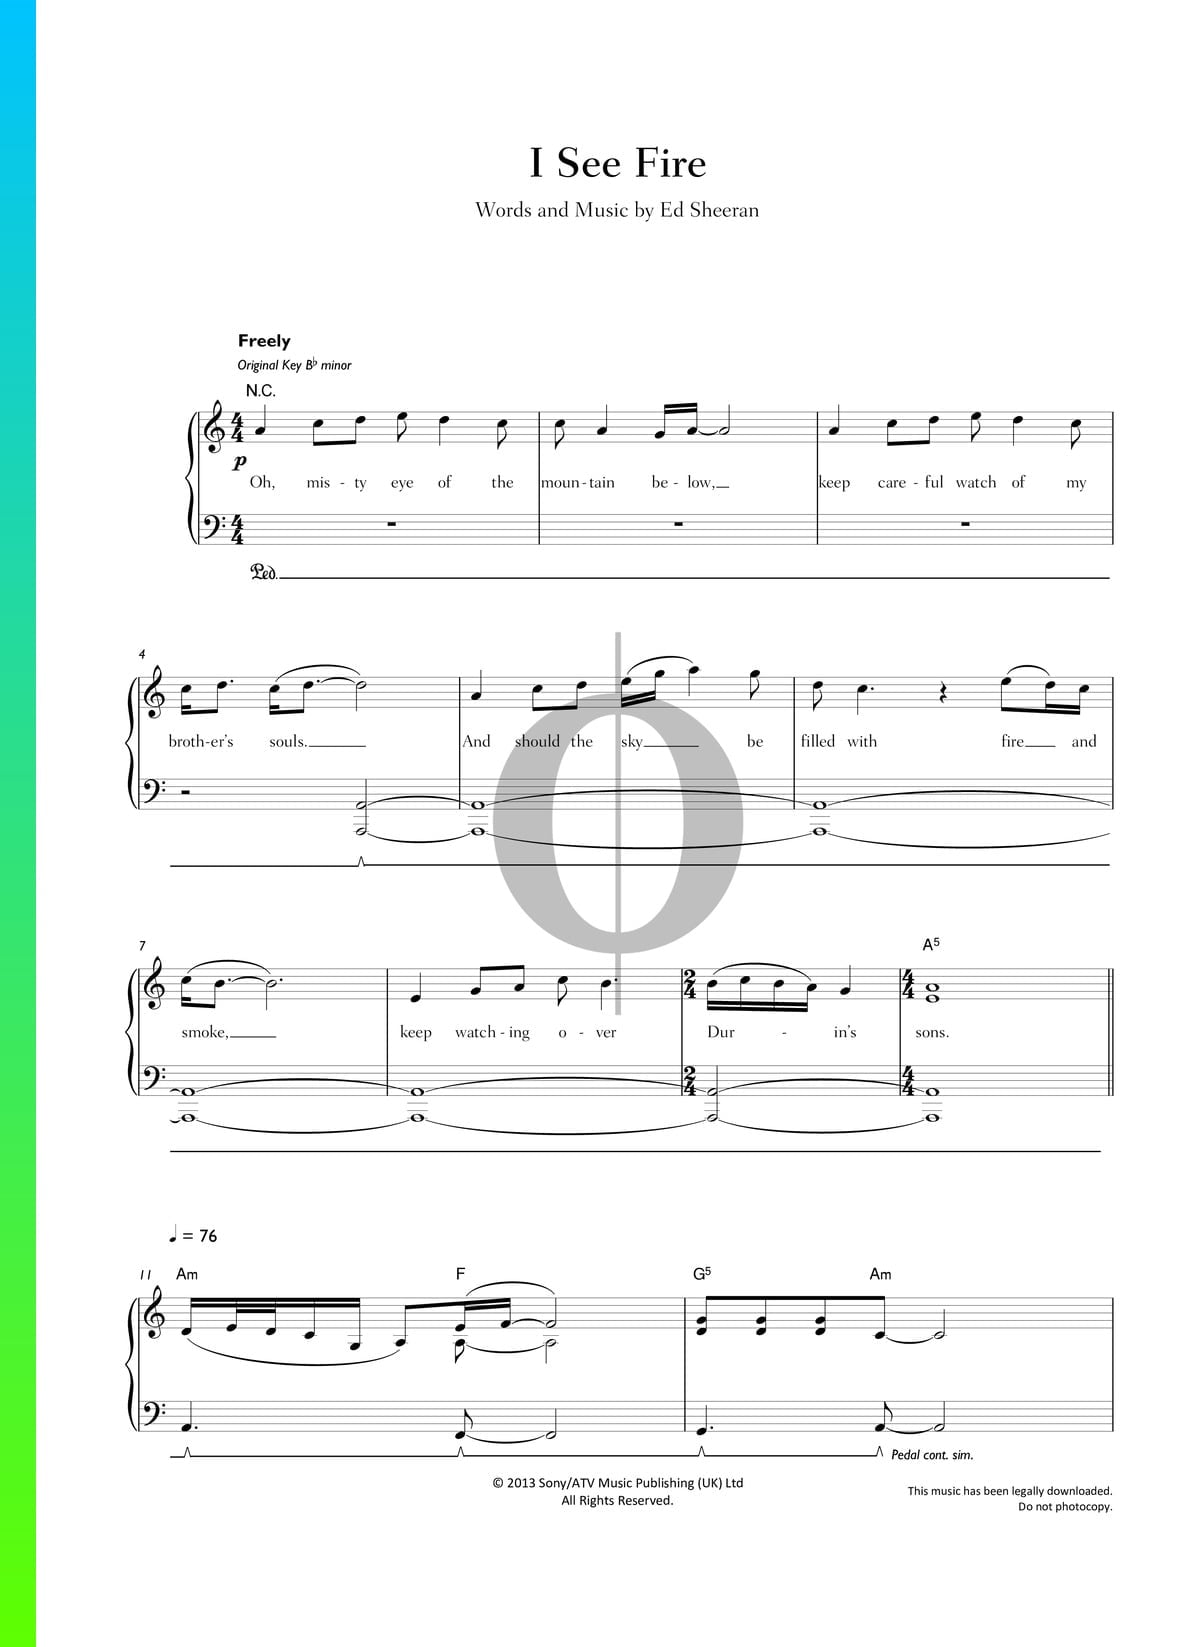 I See Fire Sheet Music Piano Voice Pdf Download Streaming Oktav